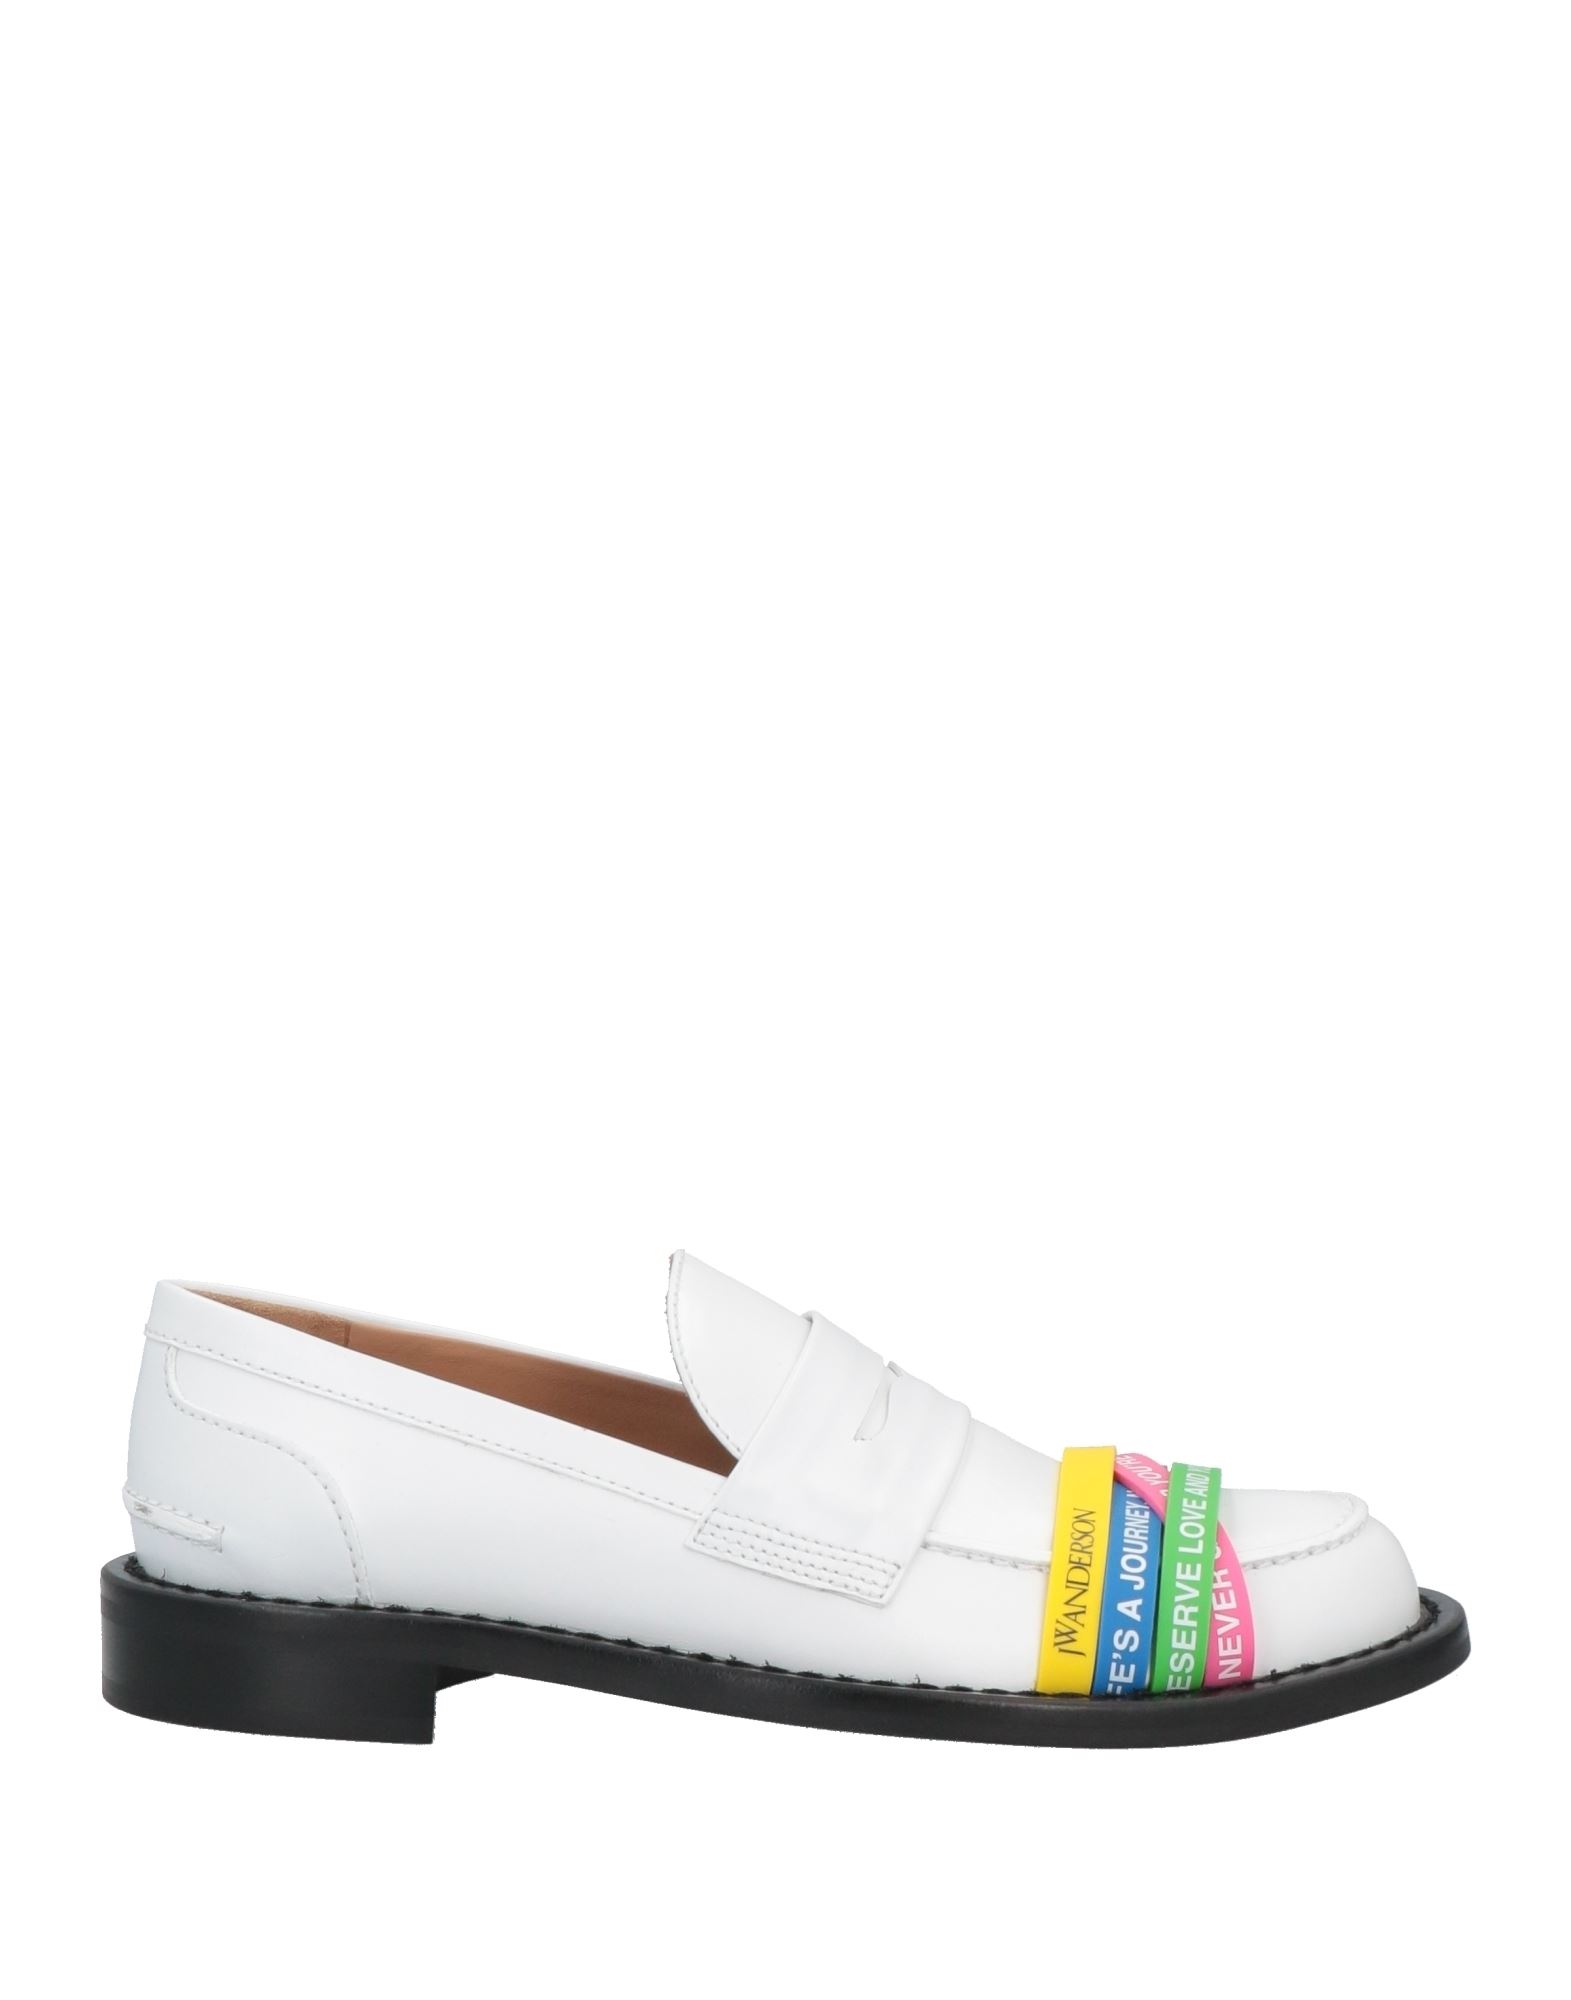 Shop Jw Anderson Woman Loafers White Size 7 Calfskin